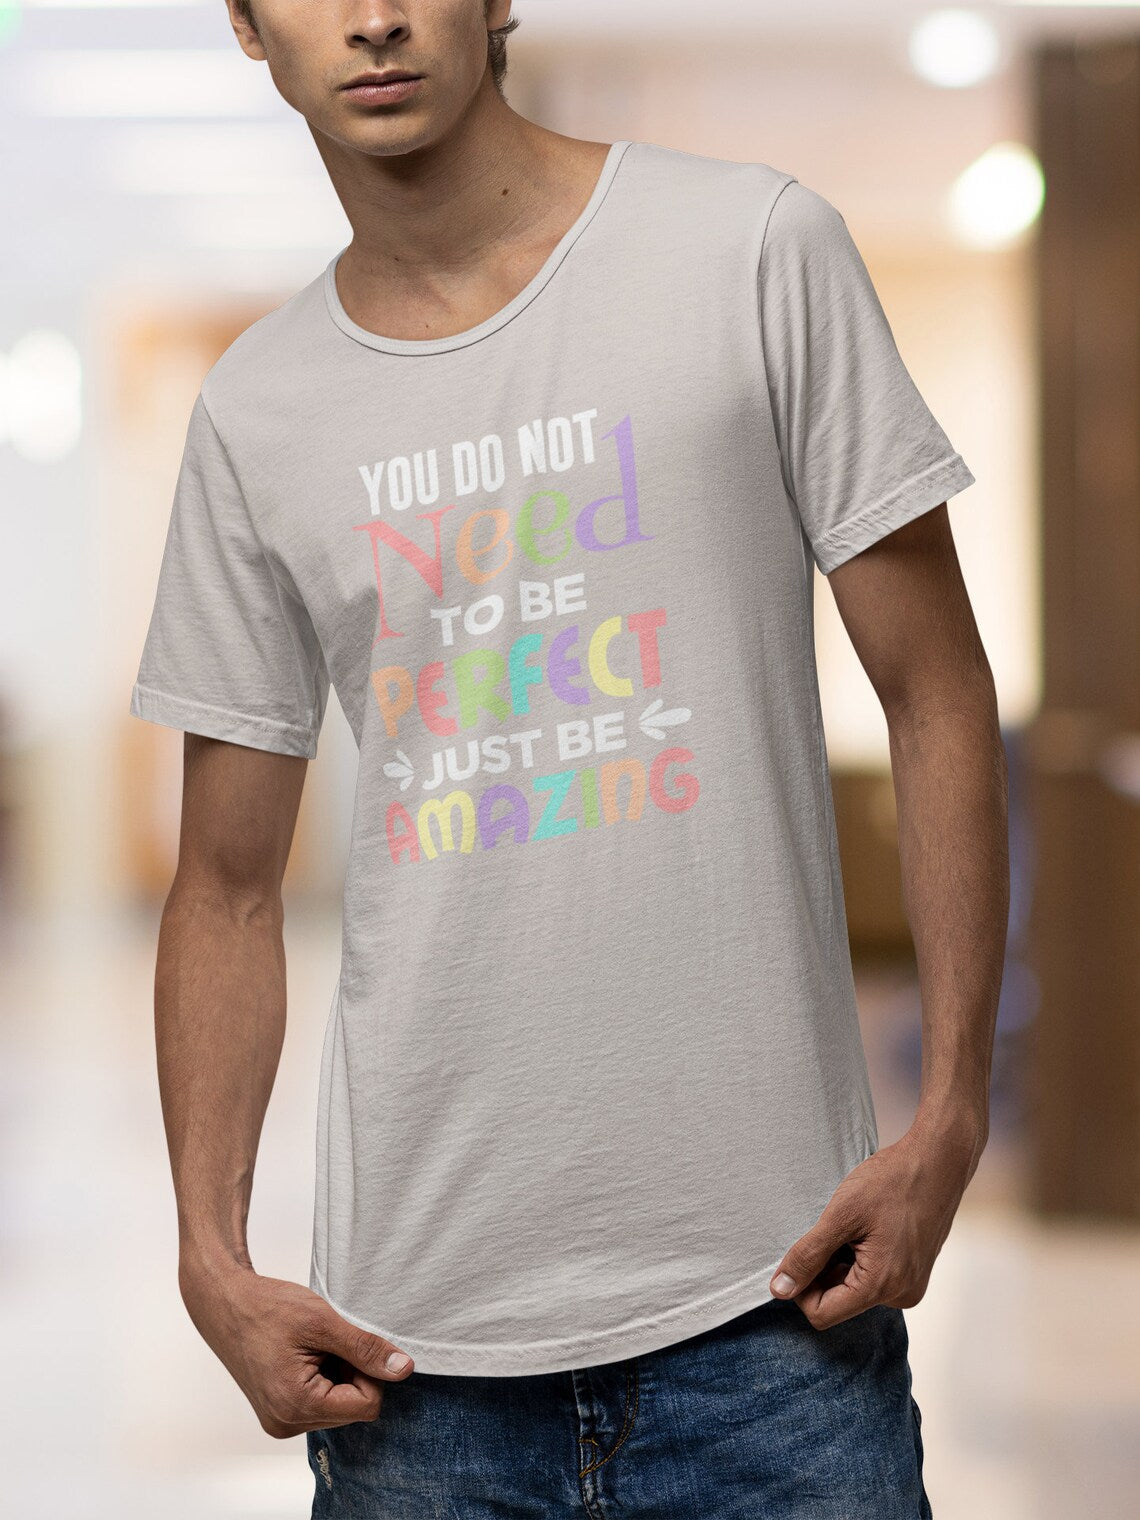 You Do Not Need To Be Perfect Just Be Amazing Men's Curved Tee, Amazing shirts, Inspirational shirts, Motivational Shirts, Positive shirts